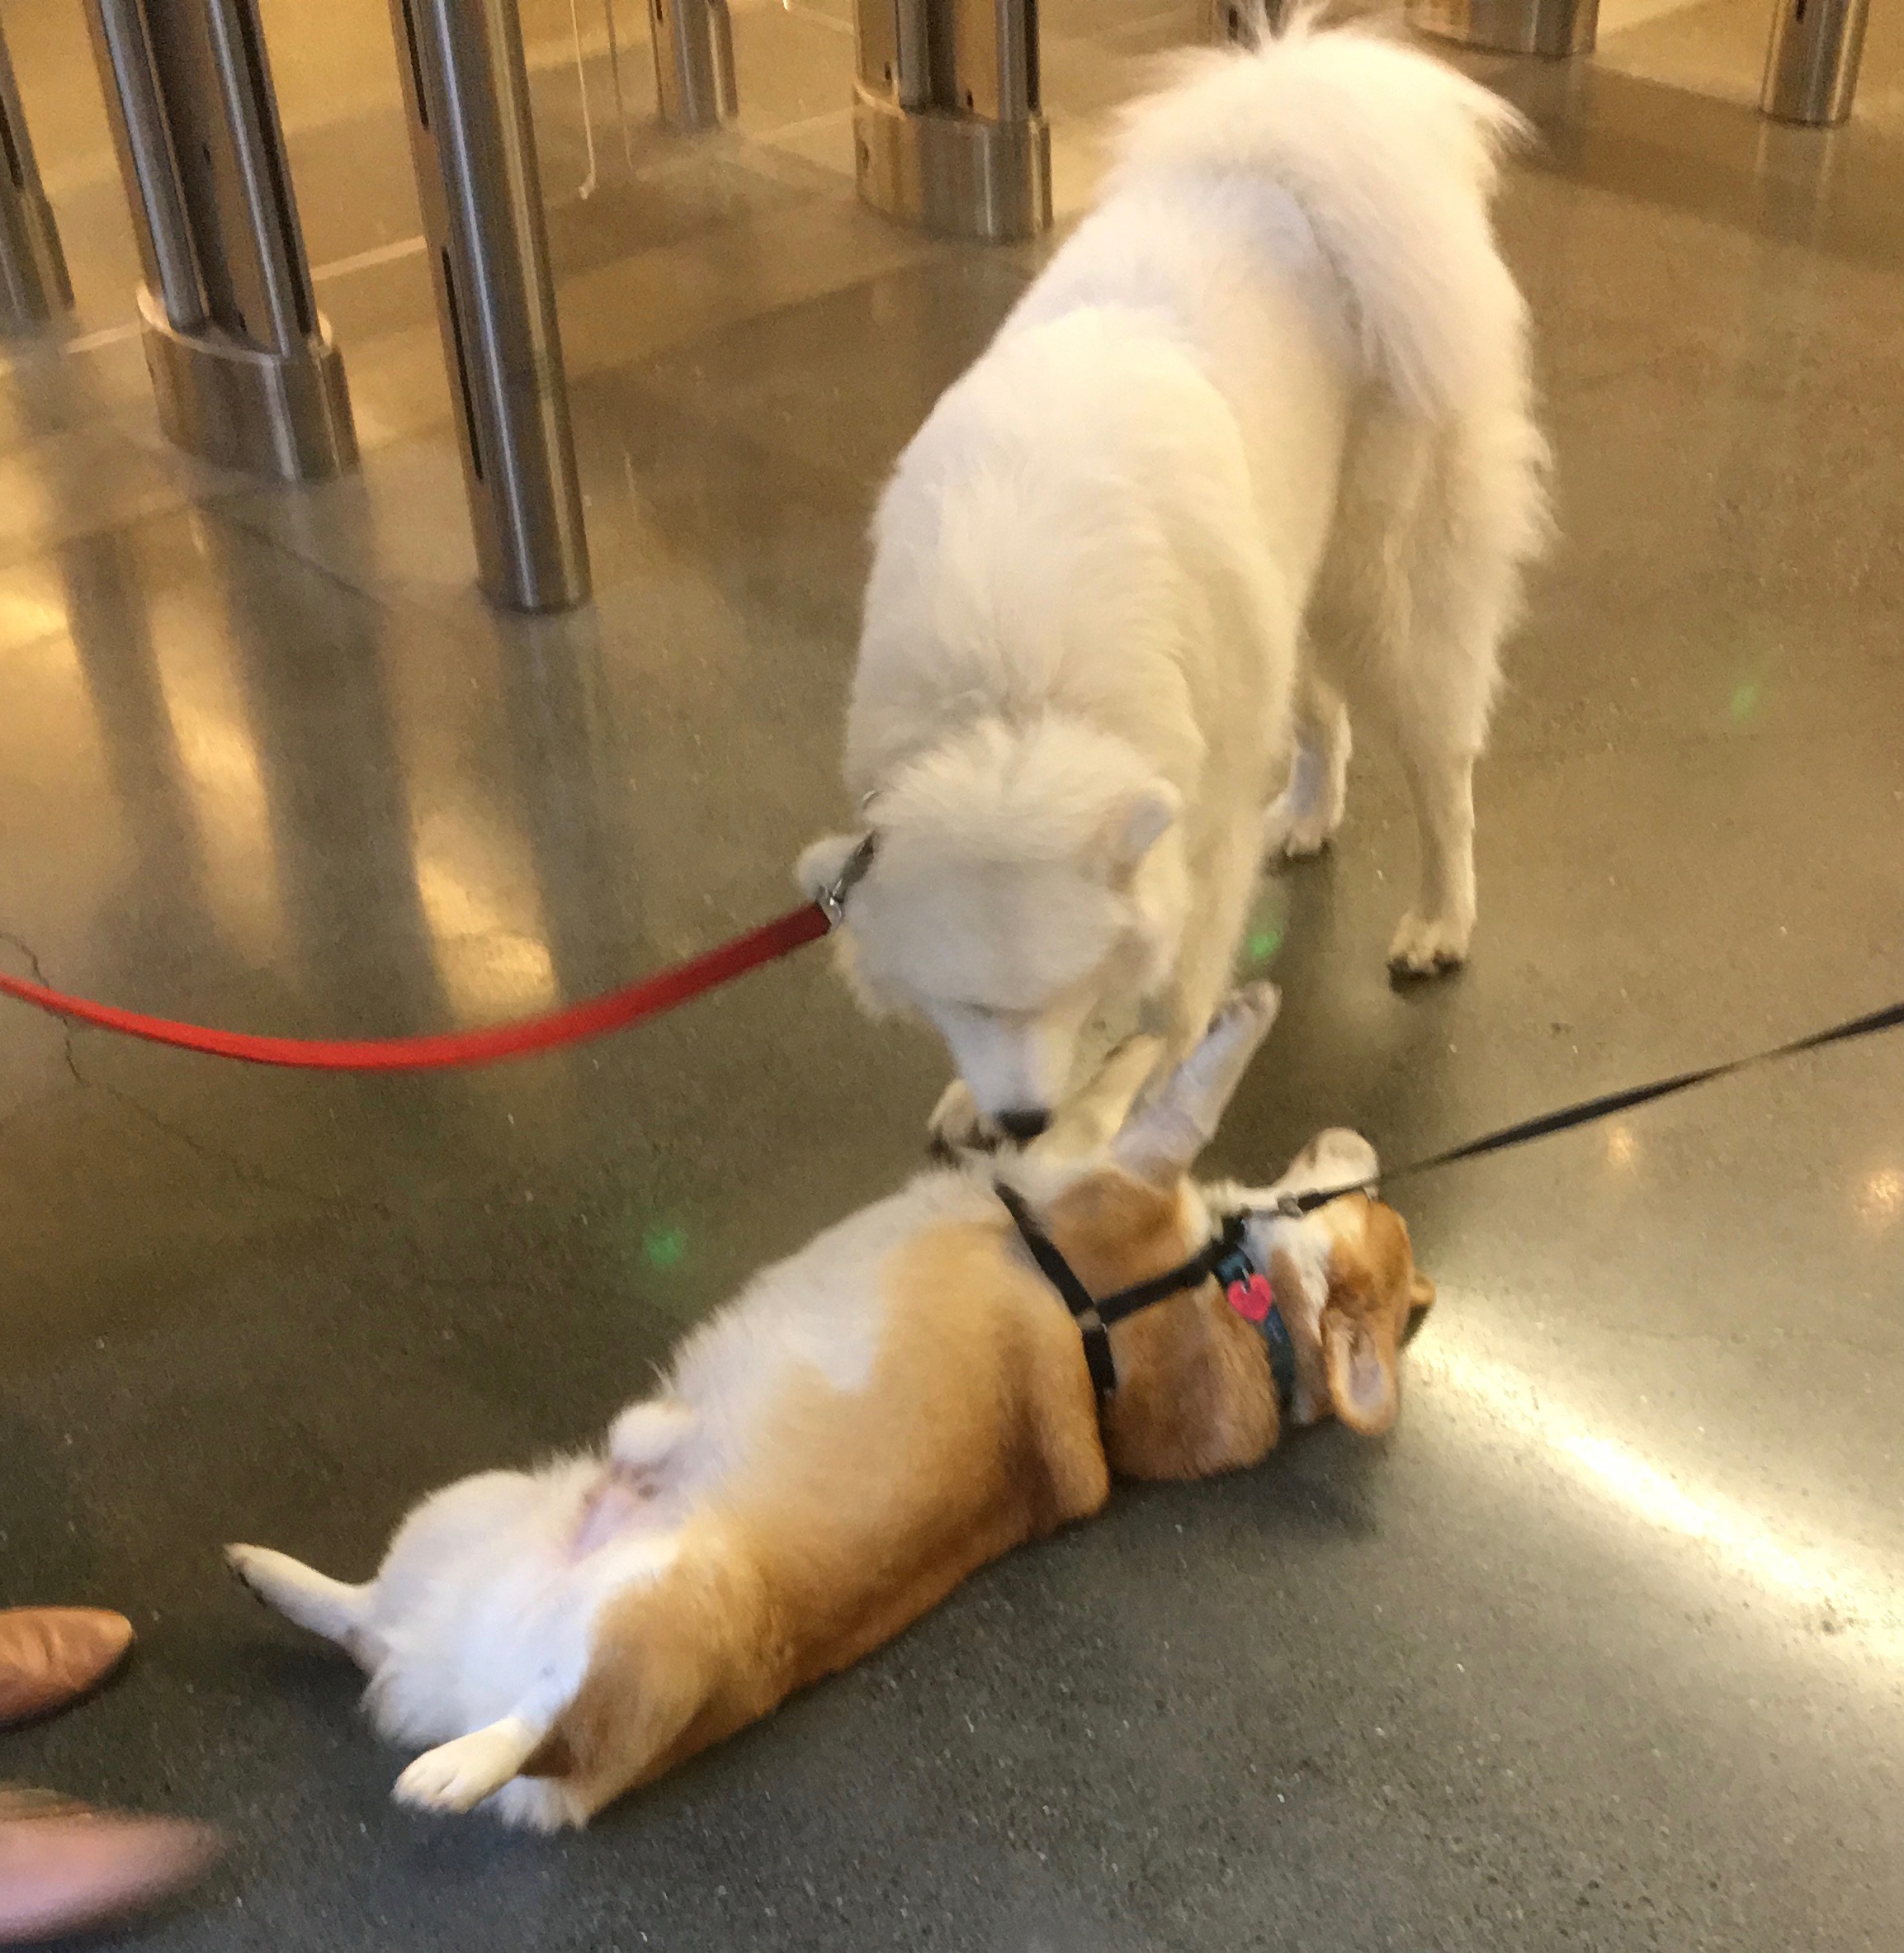 Samoyed Snorgling A Pembroke Welsh Corgi Who Is Lying On His Back On The Floor